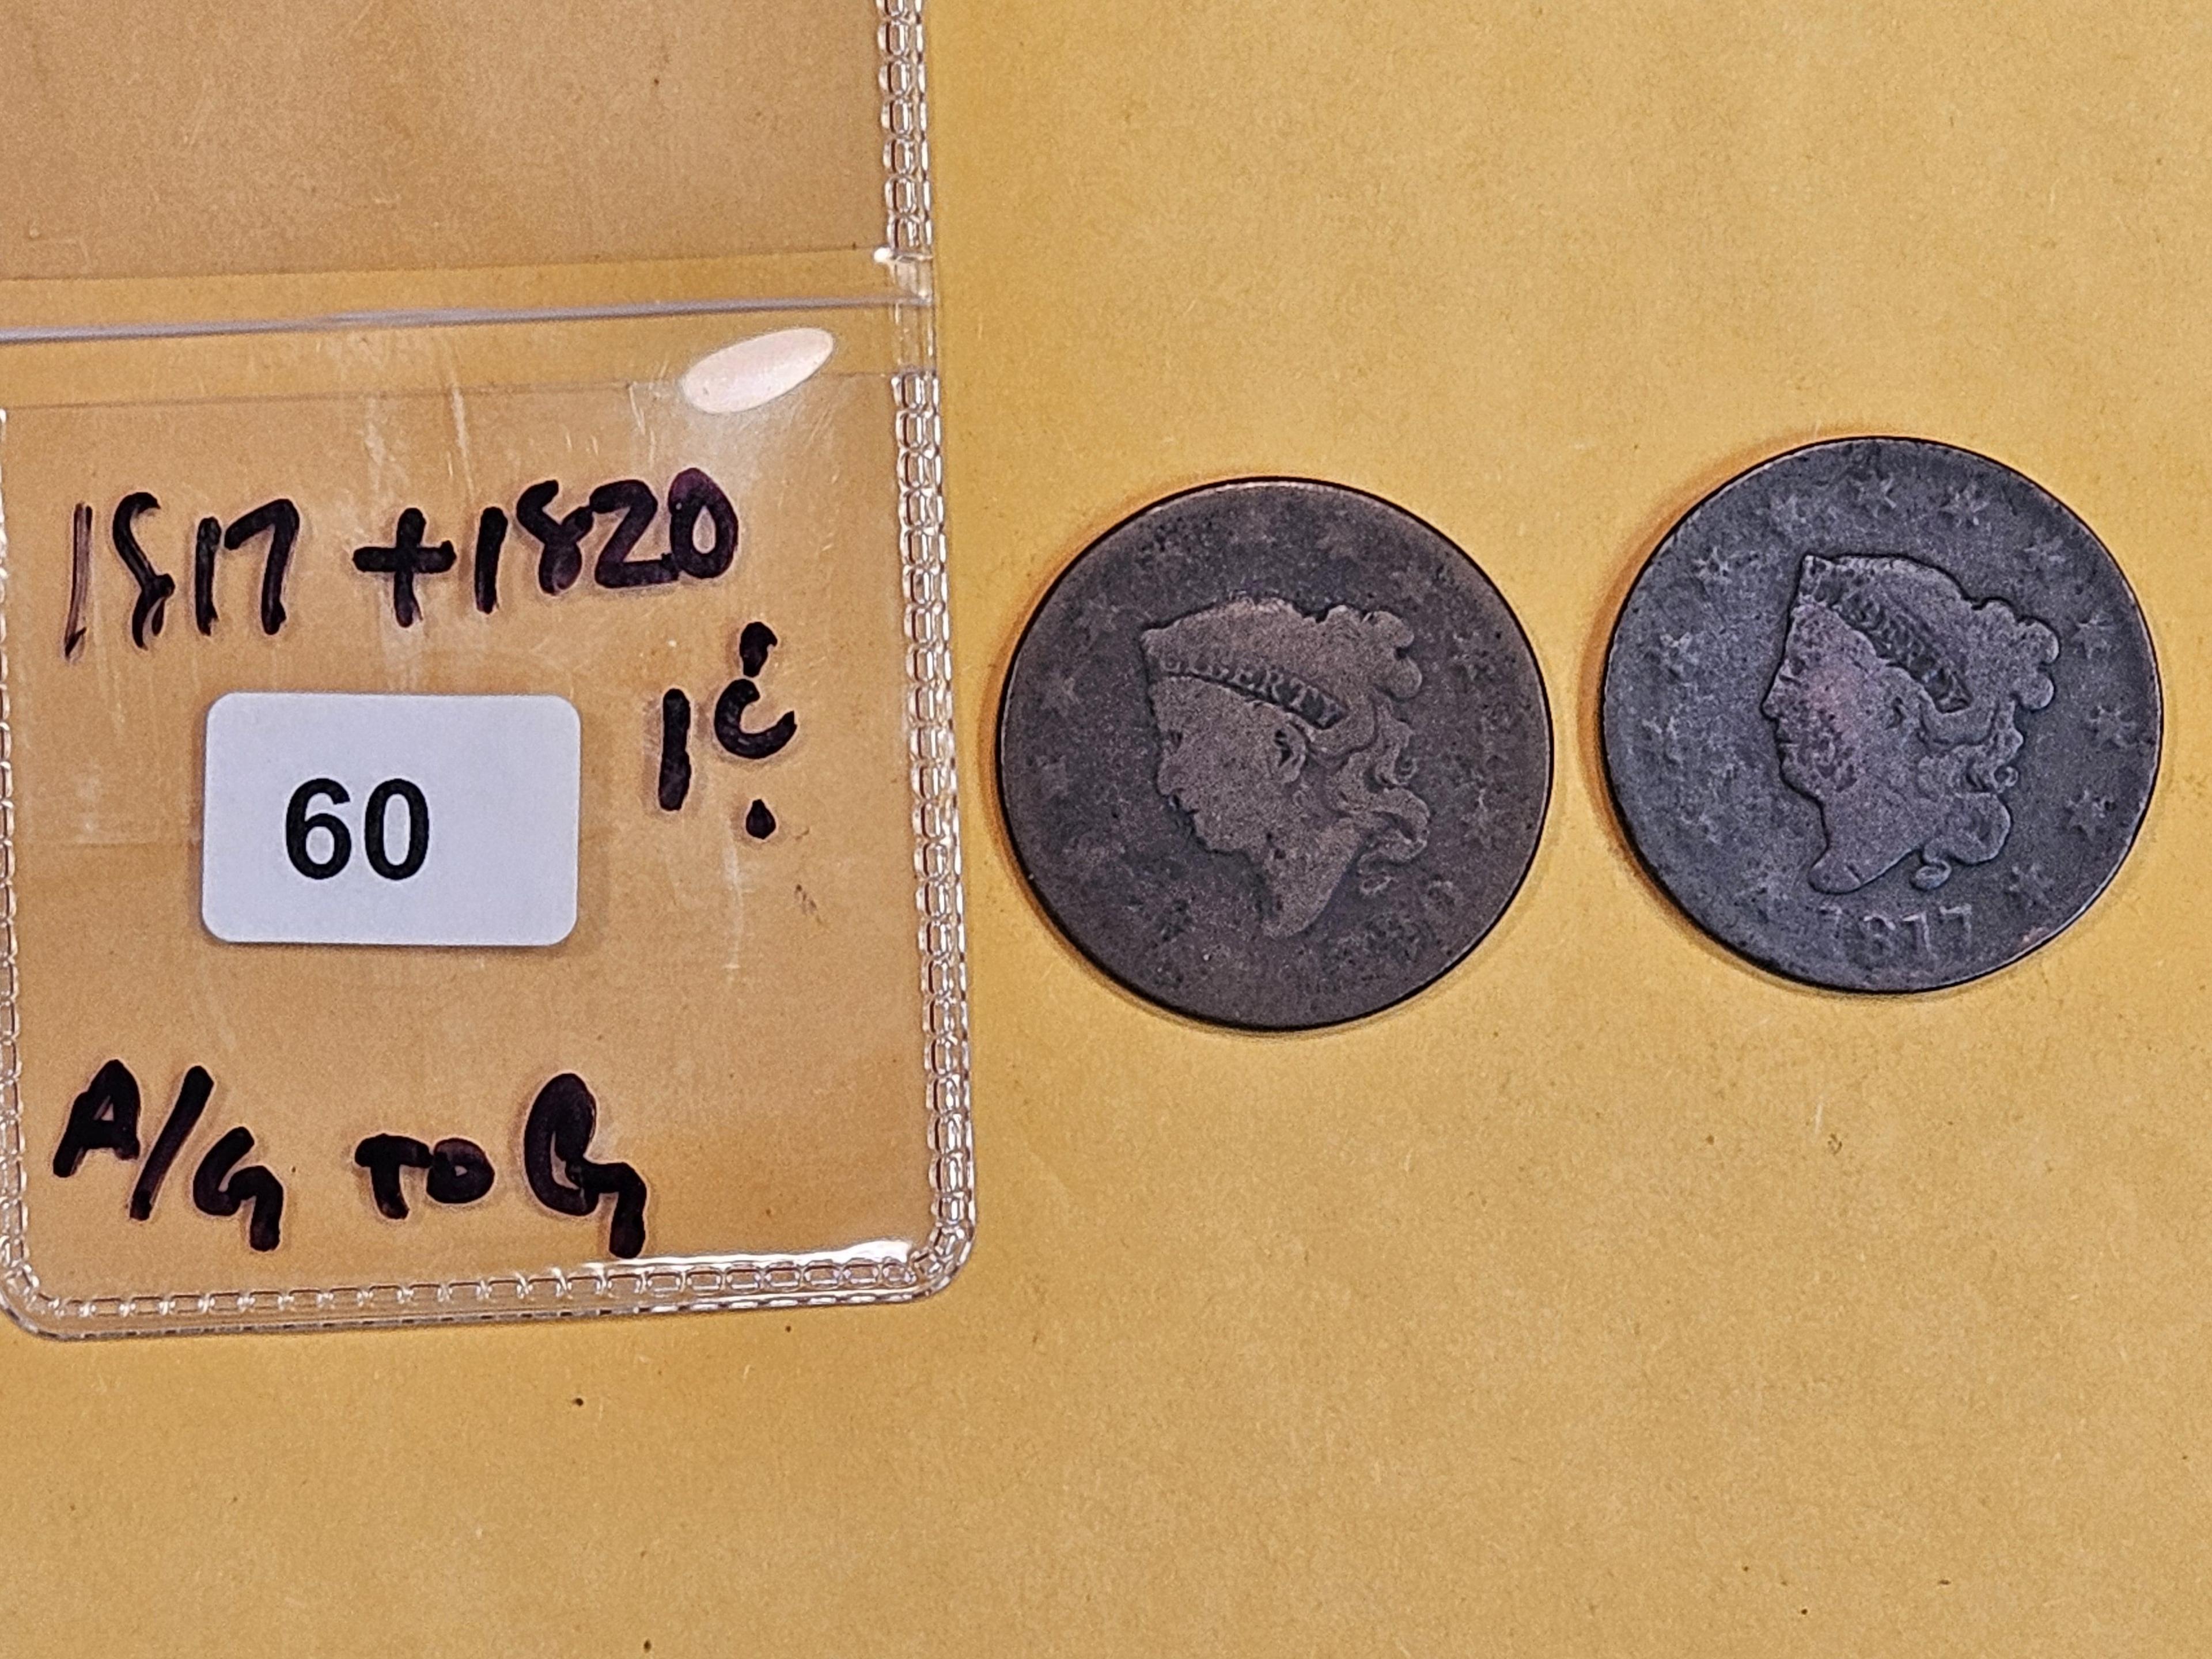 1817 and 1820 Coronet Head Large Cents